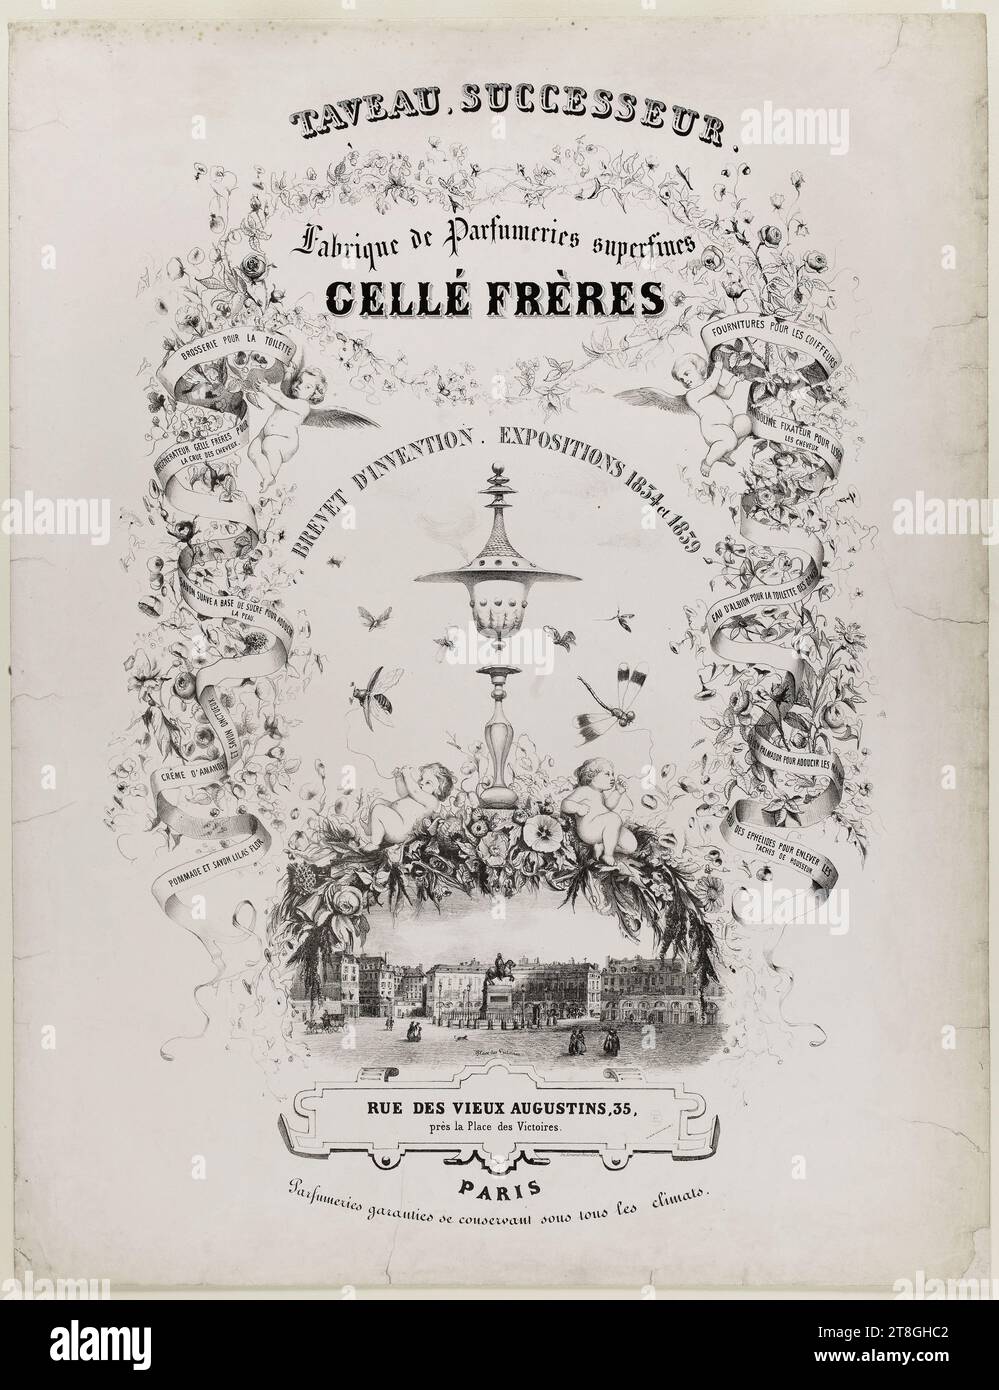 TABLE. SUCCESSOR., Superfine Perfumery Factory, GELLE FRERES, PATENT OF INVENTION. EXHIBITIONS 1834 and 1839, RUE DES VIEUX AUGUSTINS, 35, near Place des Victoires., PARIS, Perfumeries guaranteed to keep in all climates, Imprimerie Lemercier, Printer, Between 1840 and 1860, Graphic arts, Poster, Dimensions - Work: Height: 70.9 cm, Width: 52.4 cm, Dimensions - Mounting:, Height: 75.7 cm, Width: 59.2 cm Stock Photo